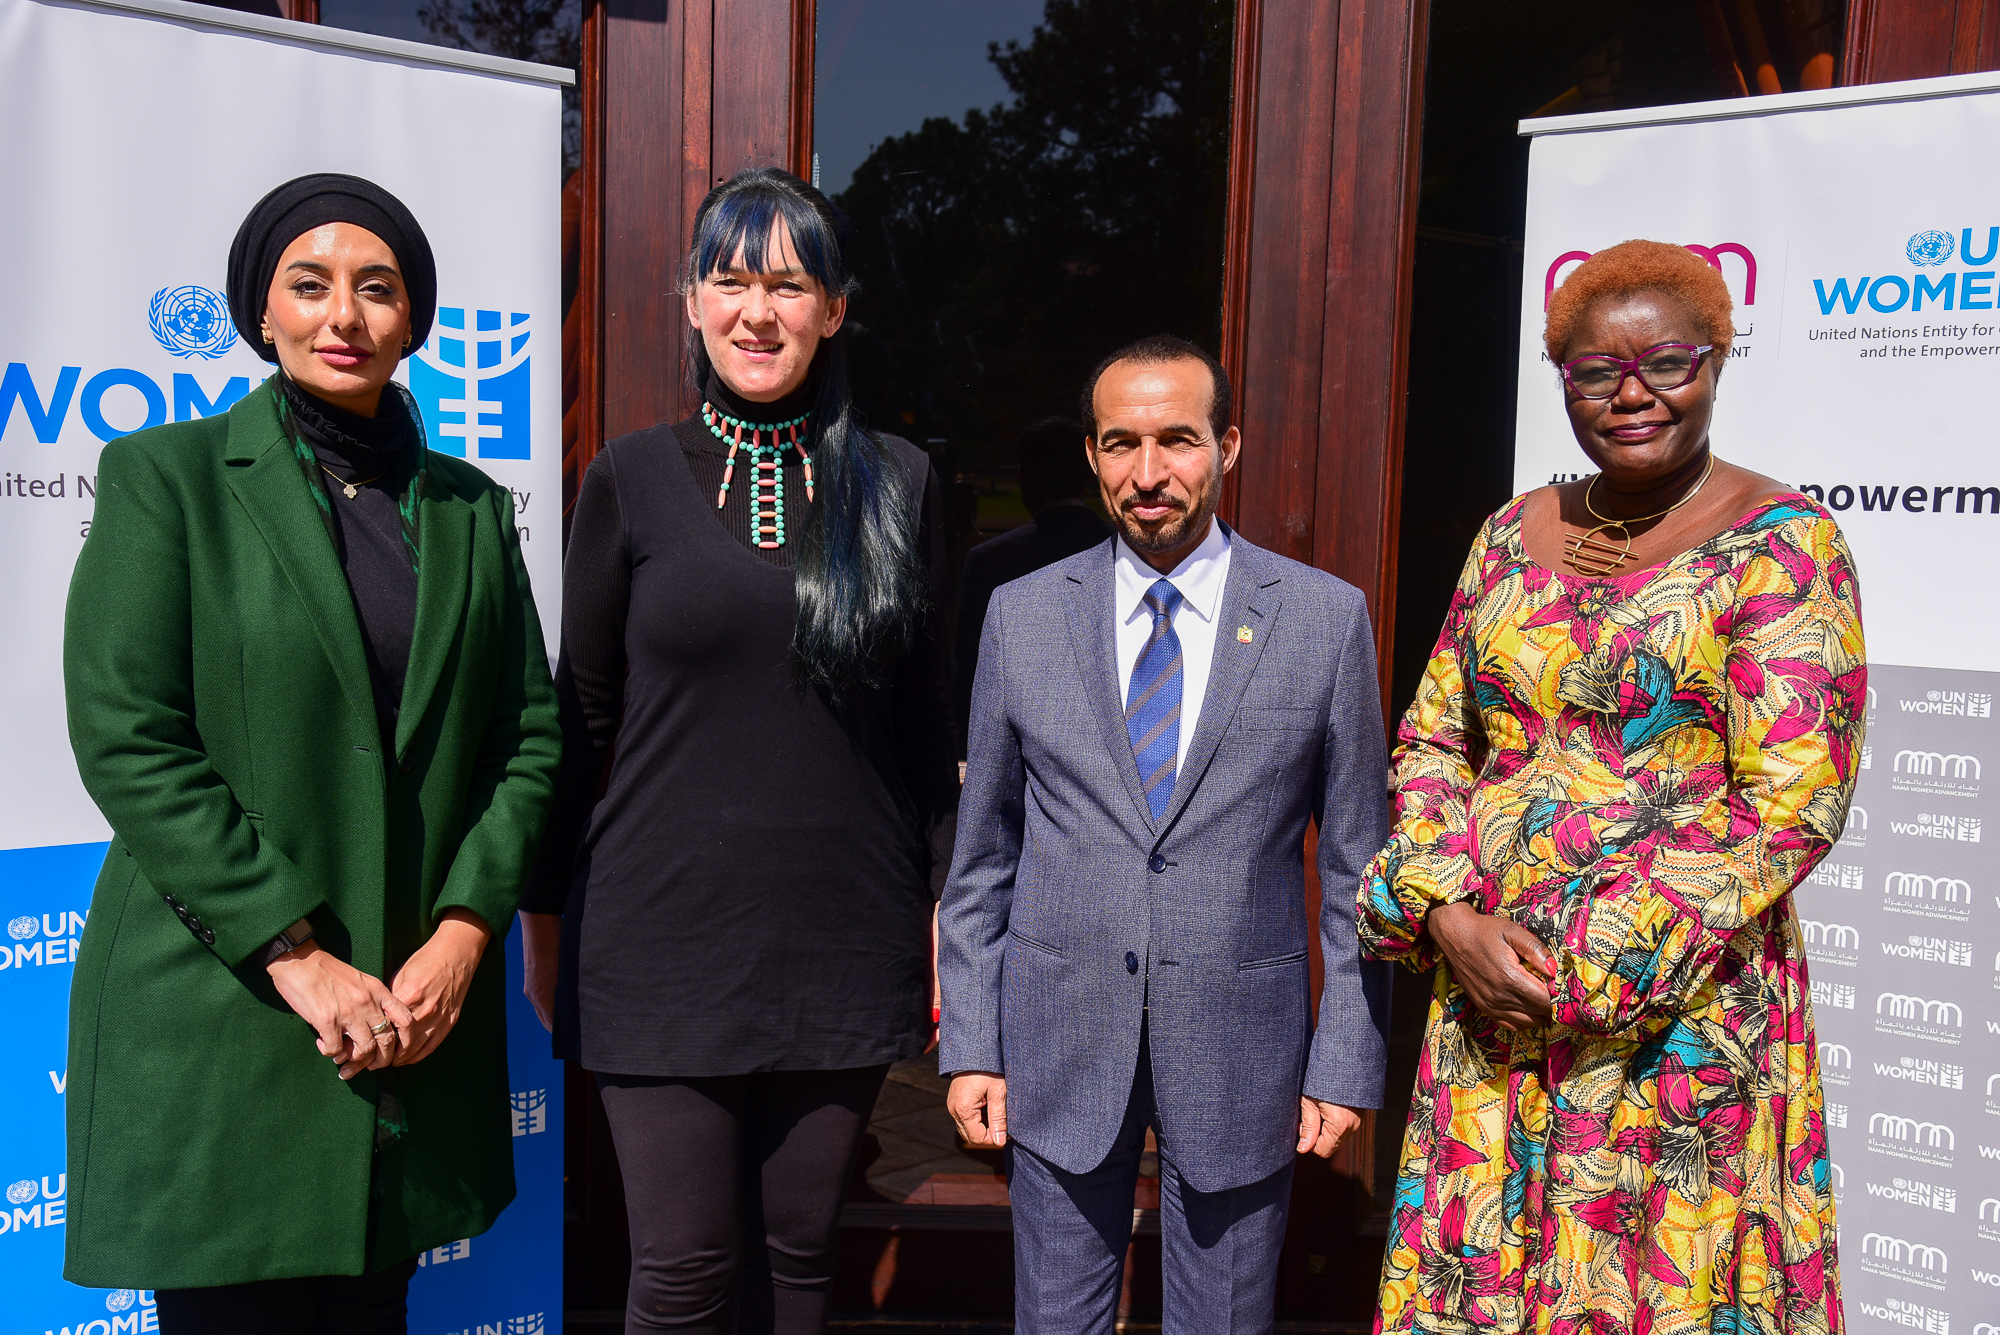 (From left) H.E Reem bin Karam, Aleta Miller - UN Women South Africa MCO Representative, H.E Mahash Saeed Alhameli - Ambassador of the UAE to South Africa, and Dr. Jemimah Njuki - UN Women Chief of Economic Empowerment pose for a group picture on the sidelines of a meeting with met key government sector departments (Photo: UN Women/James Ochweri